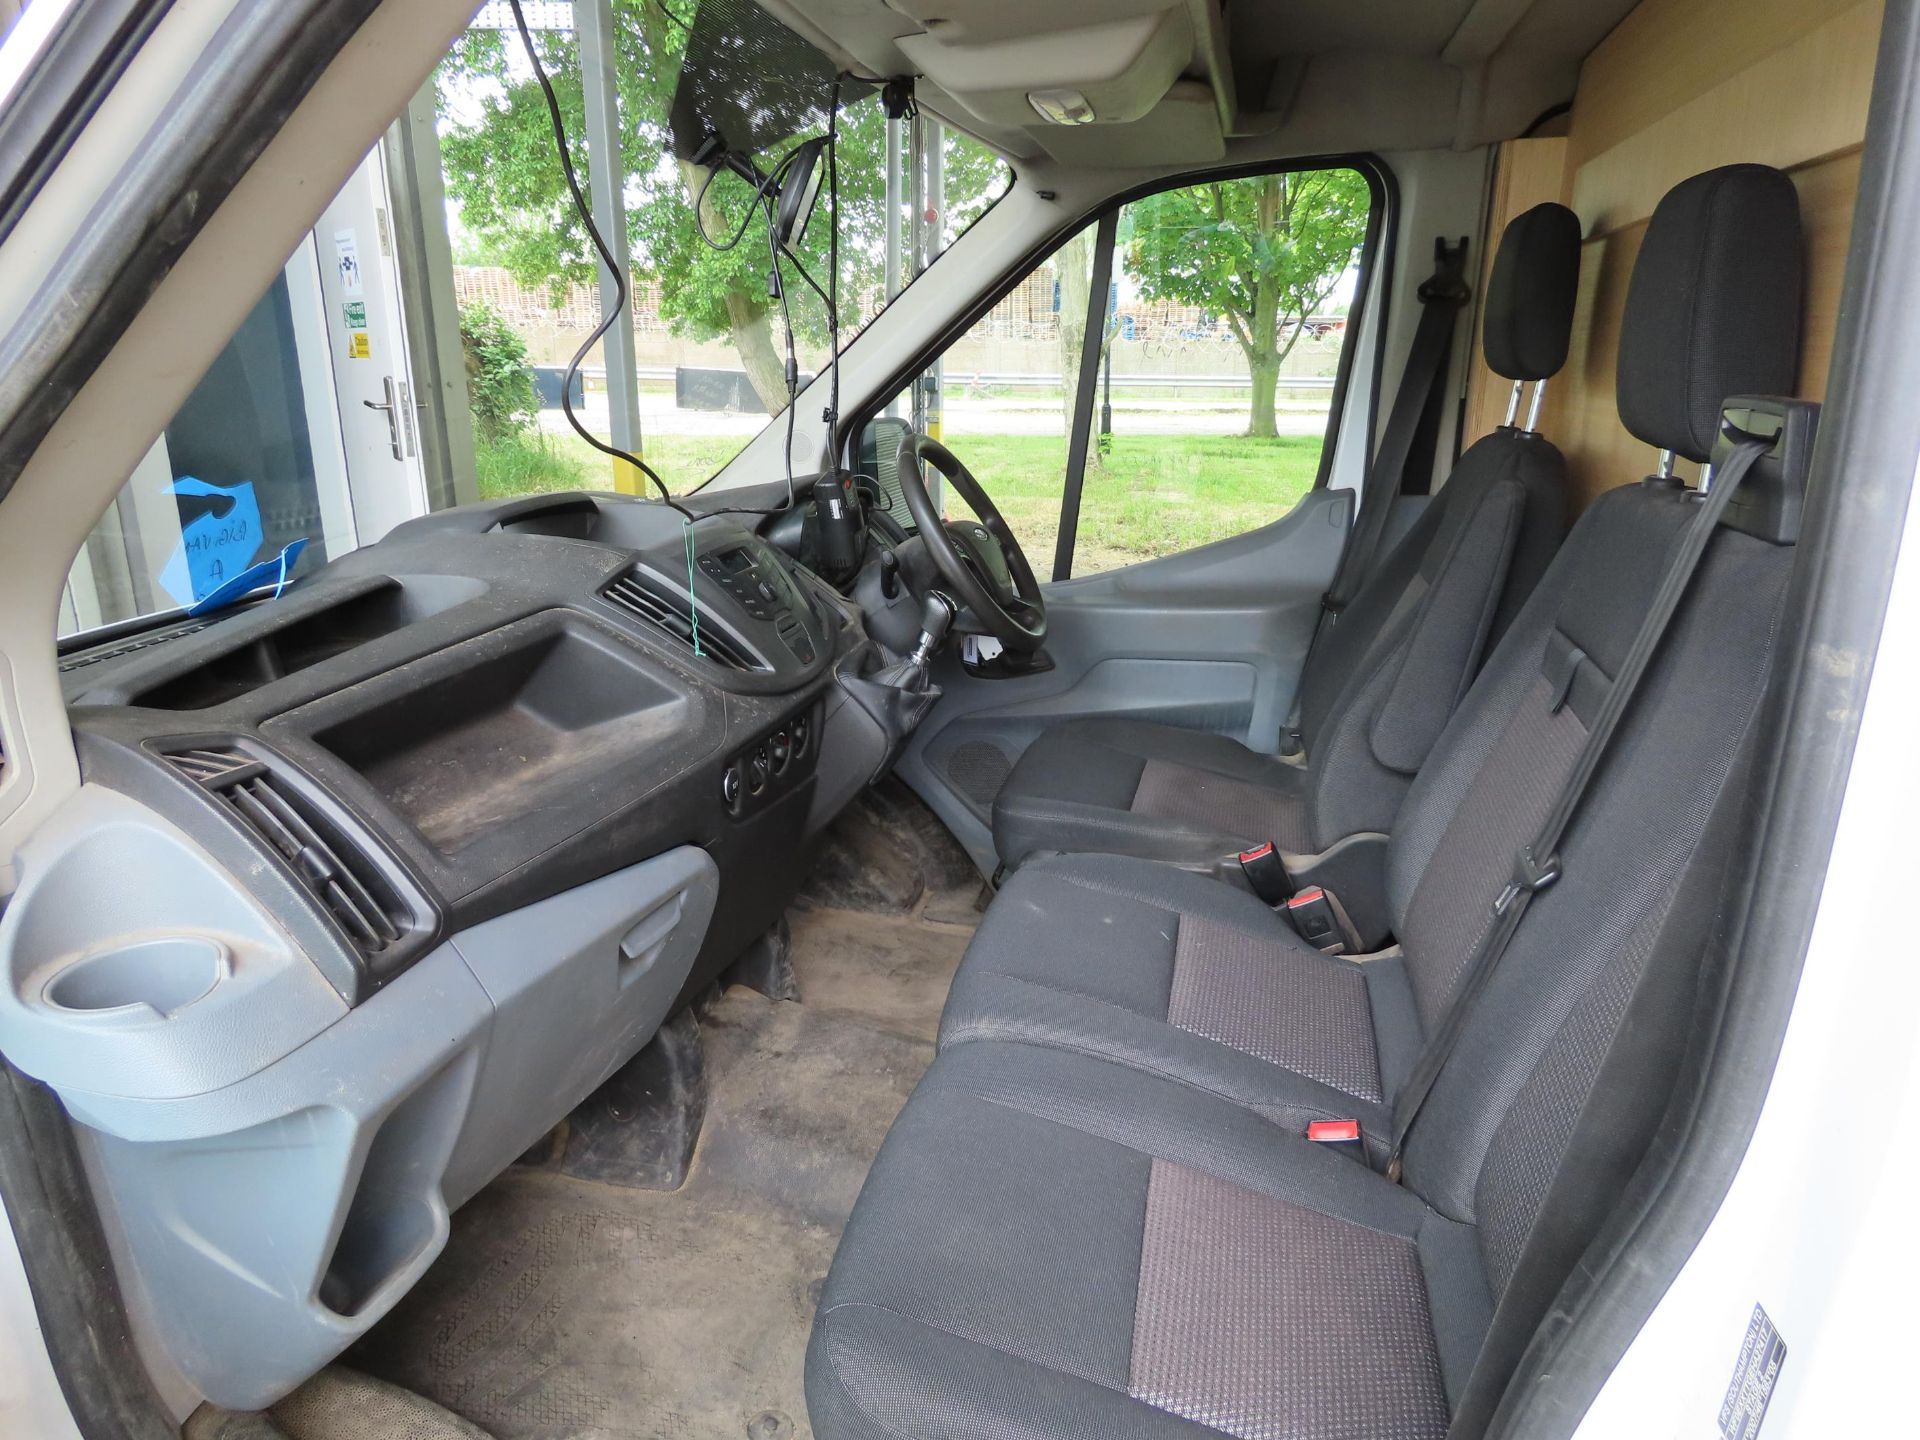 Ford Transit 2.0 TDCI 130 Double Cab Tipper 2018 '18 Reg' Euro 6 - ULEZ Compliant - Image 10 of 12